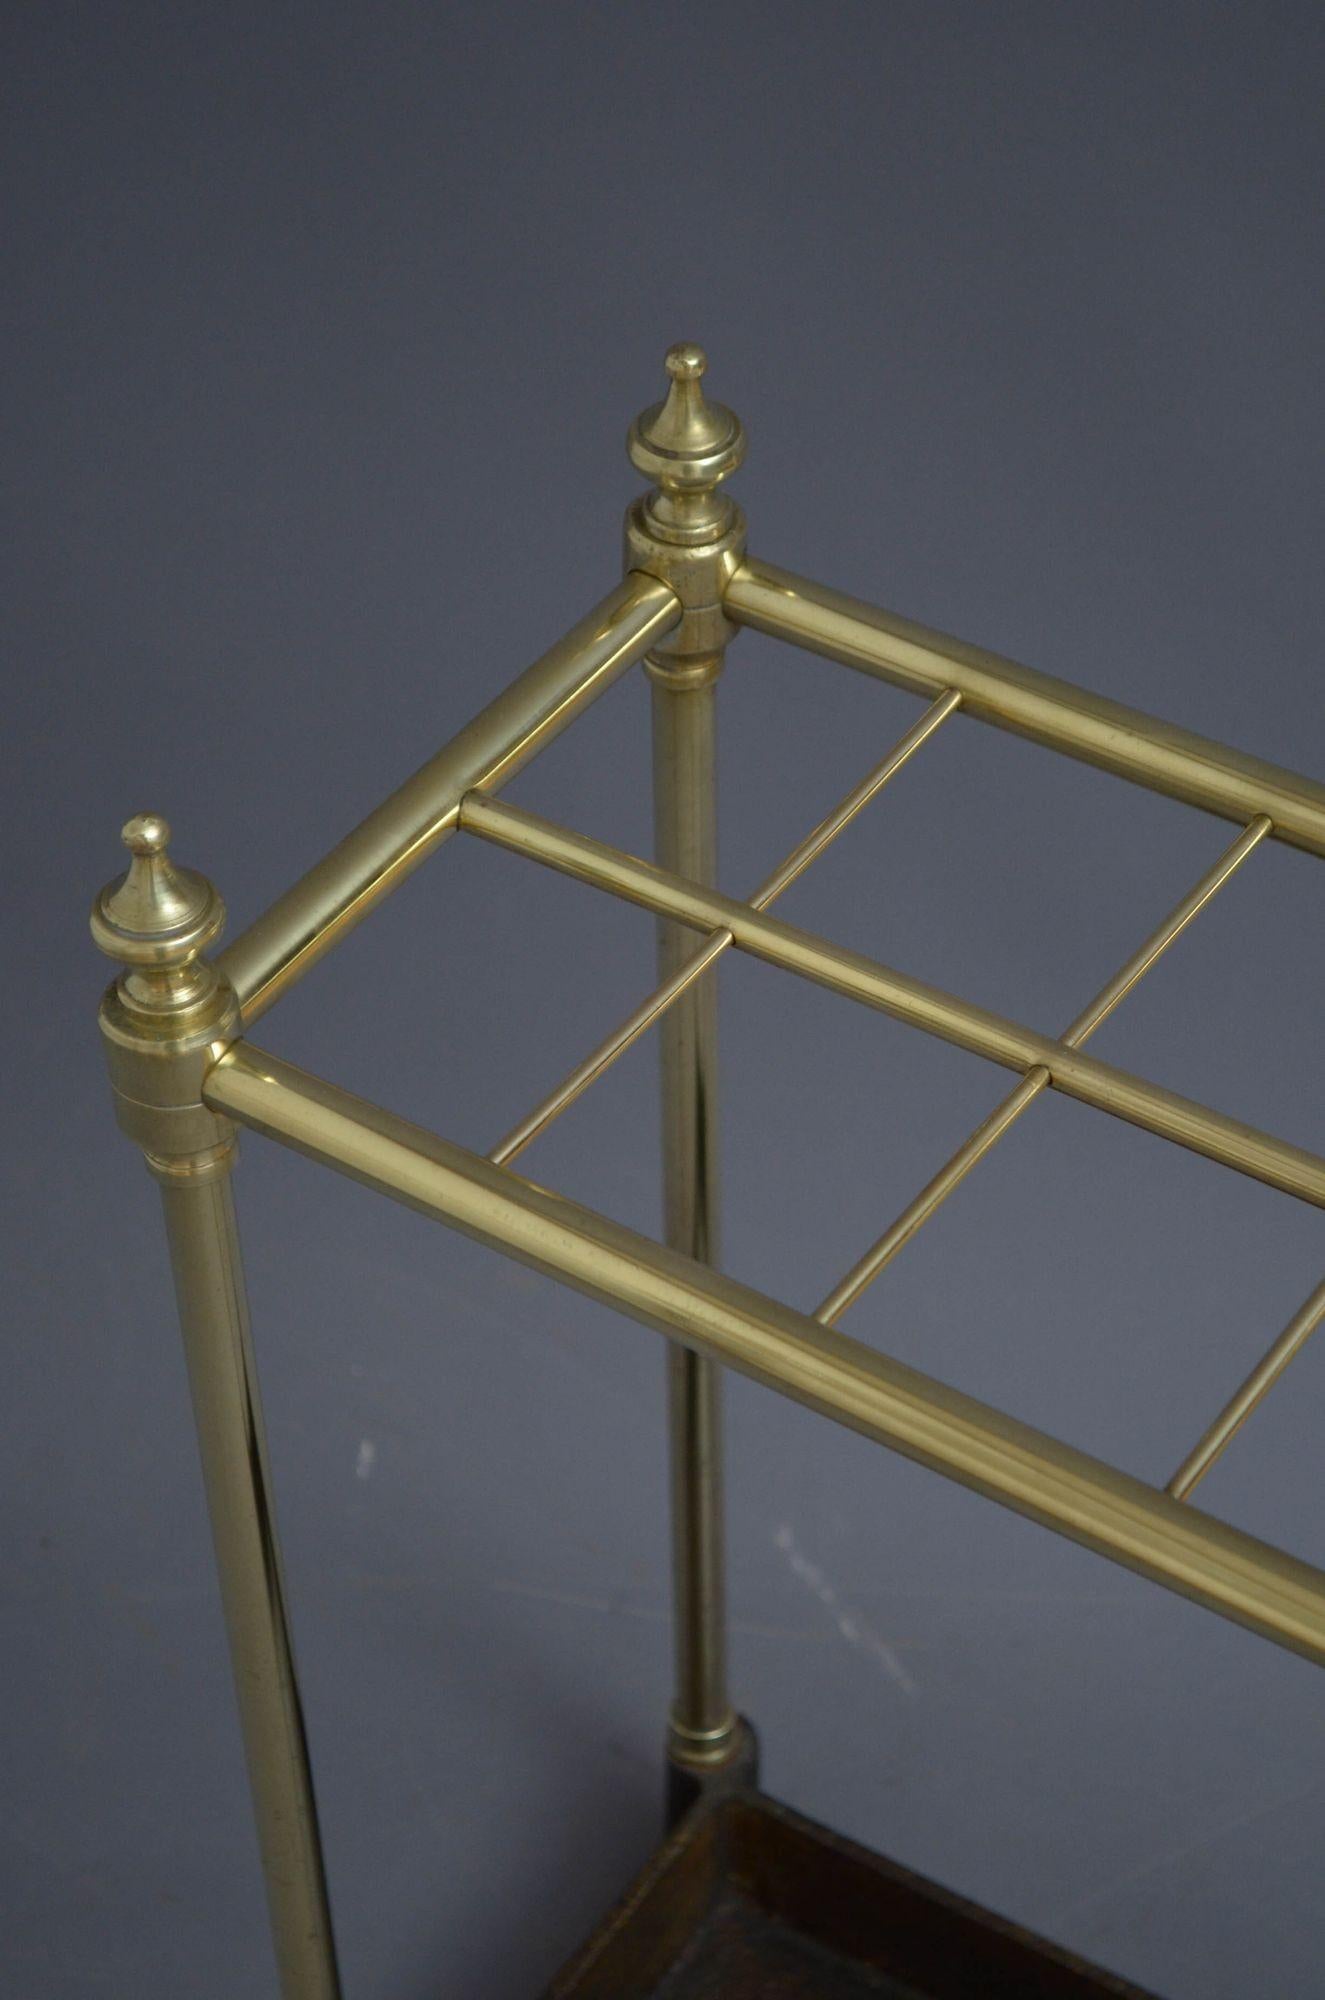 Sn5345 Victorian brass umbrella stand / stick stand with eight divisions, decorative finials and cast iron drip tray, all in home ready condition. c1880
H22.5